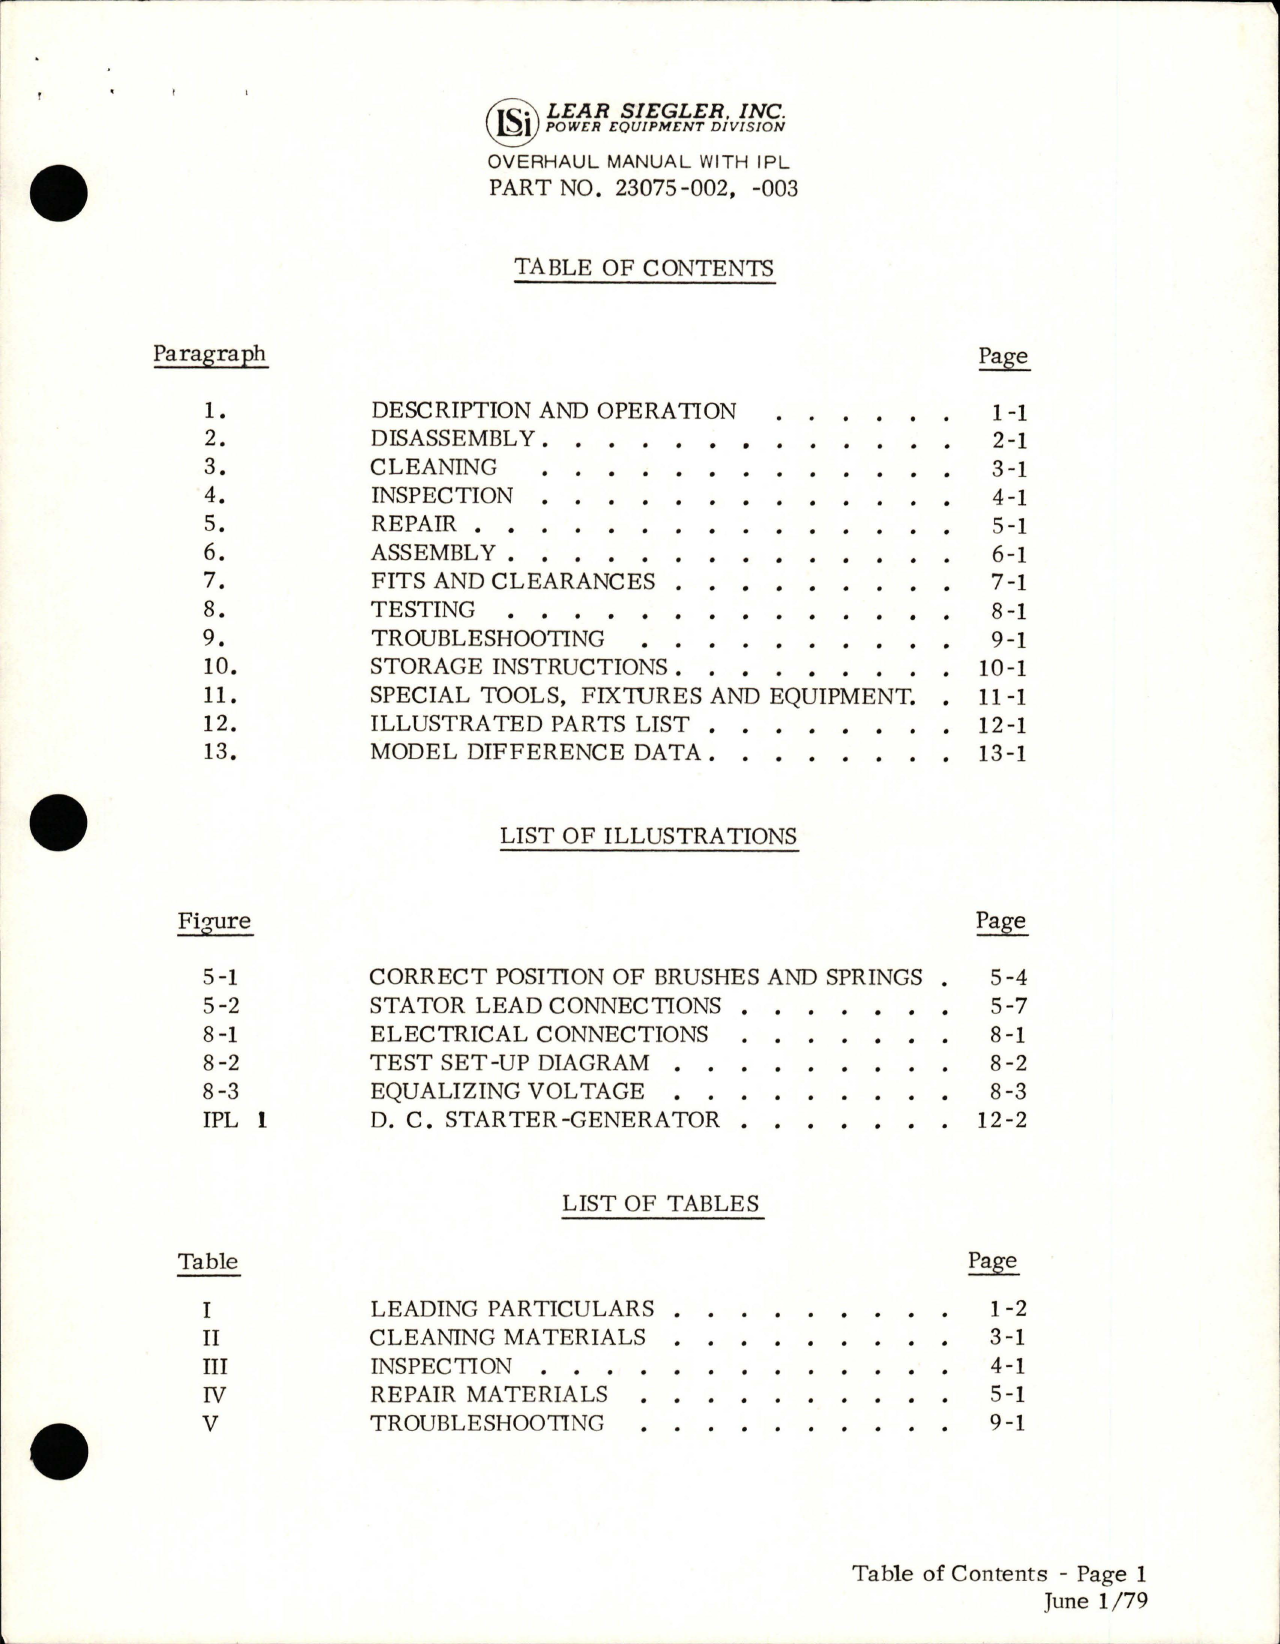 Sample page 7 from AirCorps Library document: Overhaul Manual with Illustrated Parts List for DC Starter-Generator